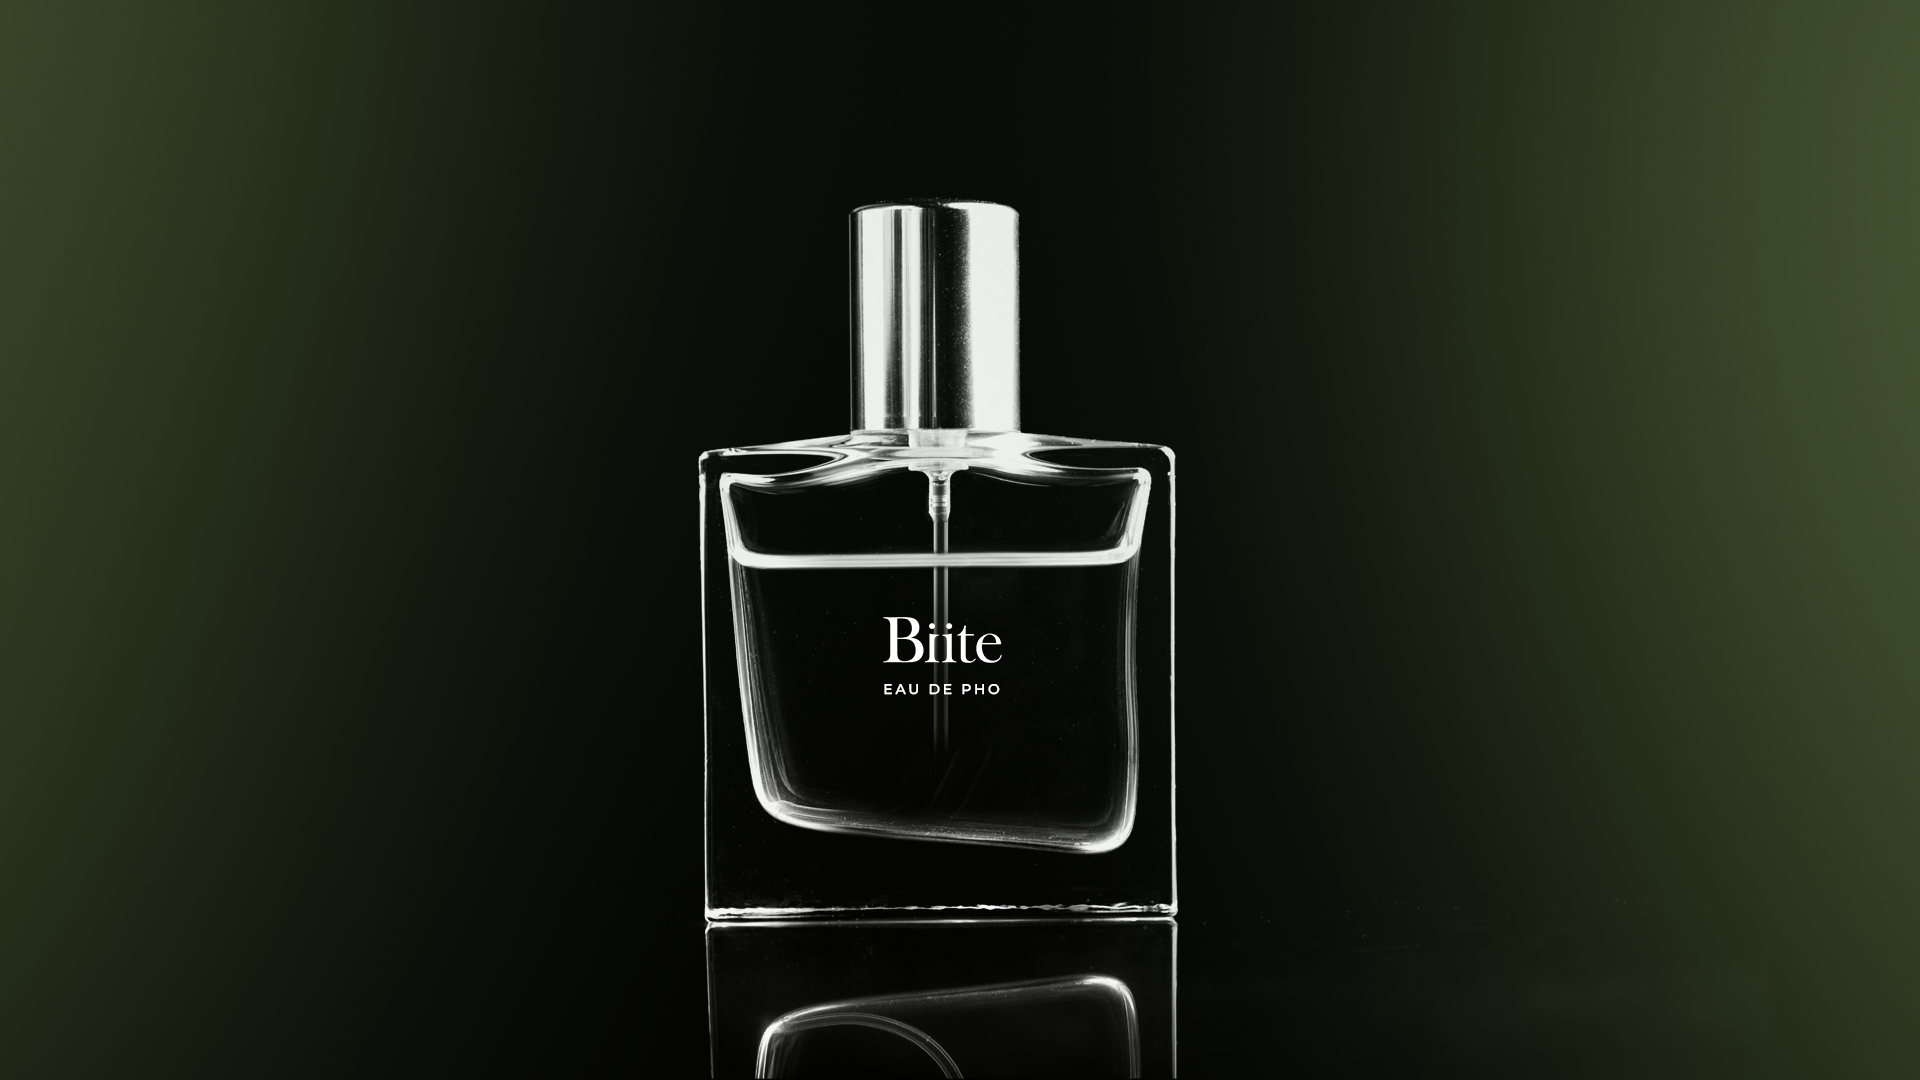 Eau de Pho: The First Fragrance from Biite